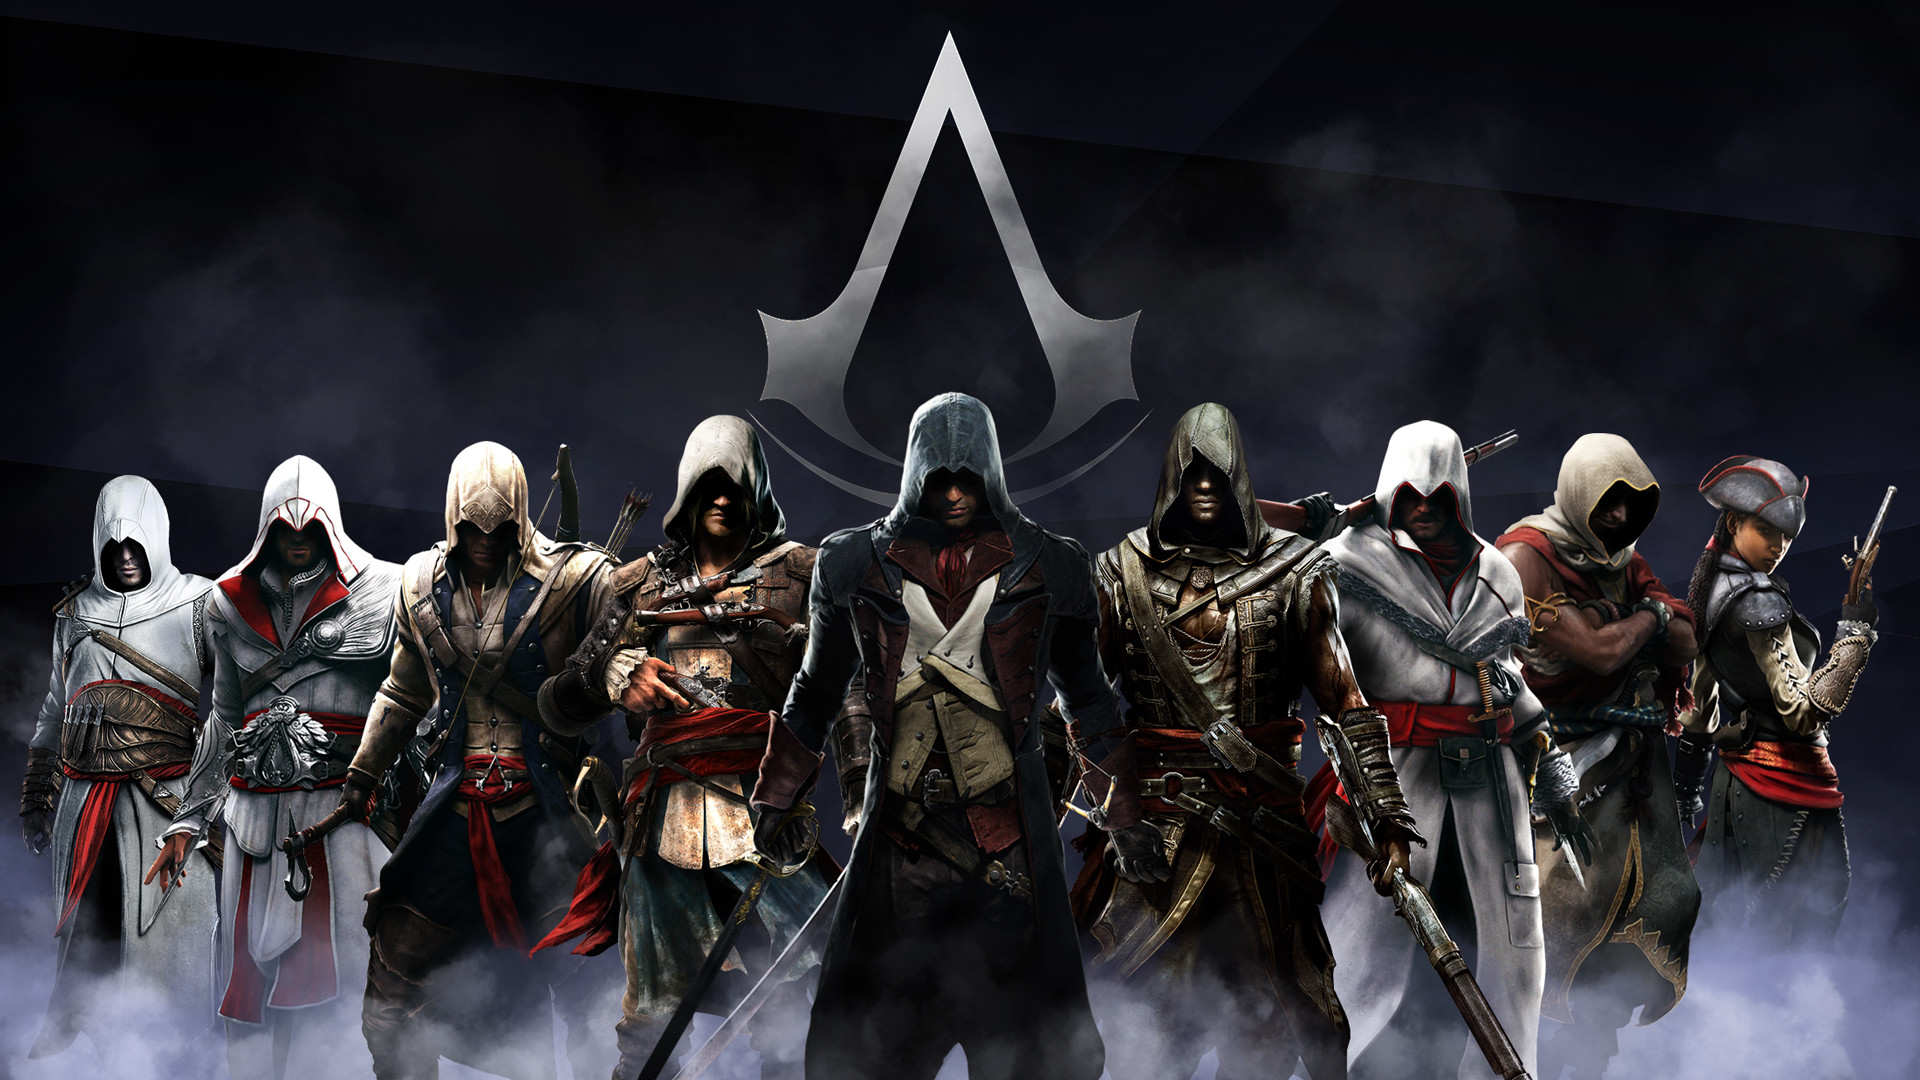 1920x1080 Assassin Creed Unity Wallpapers For Android